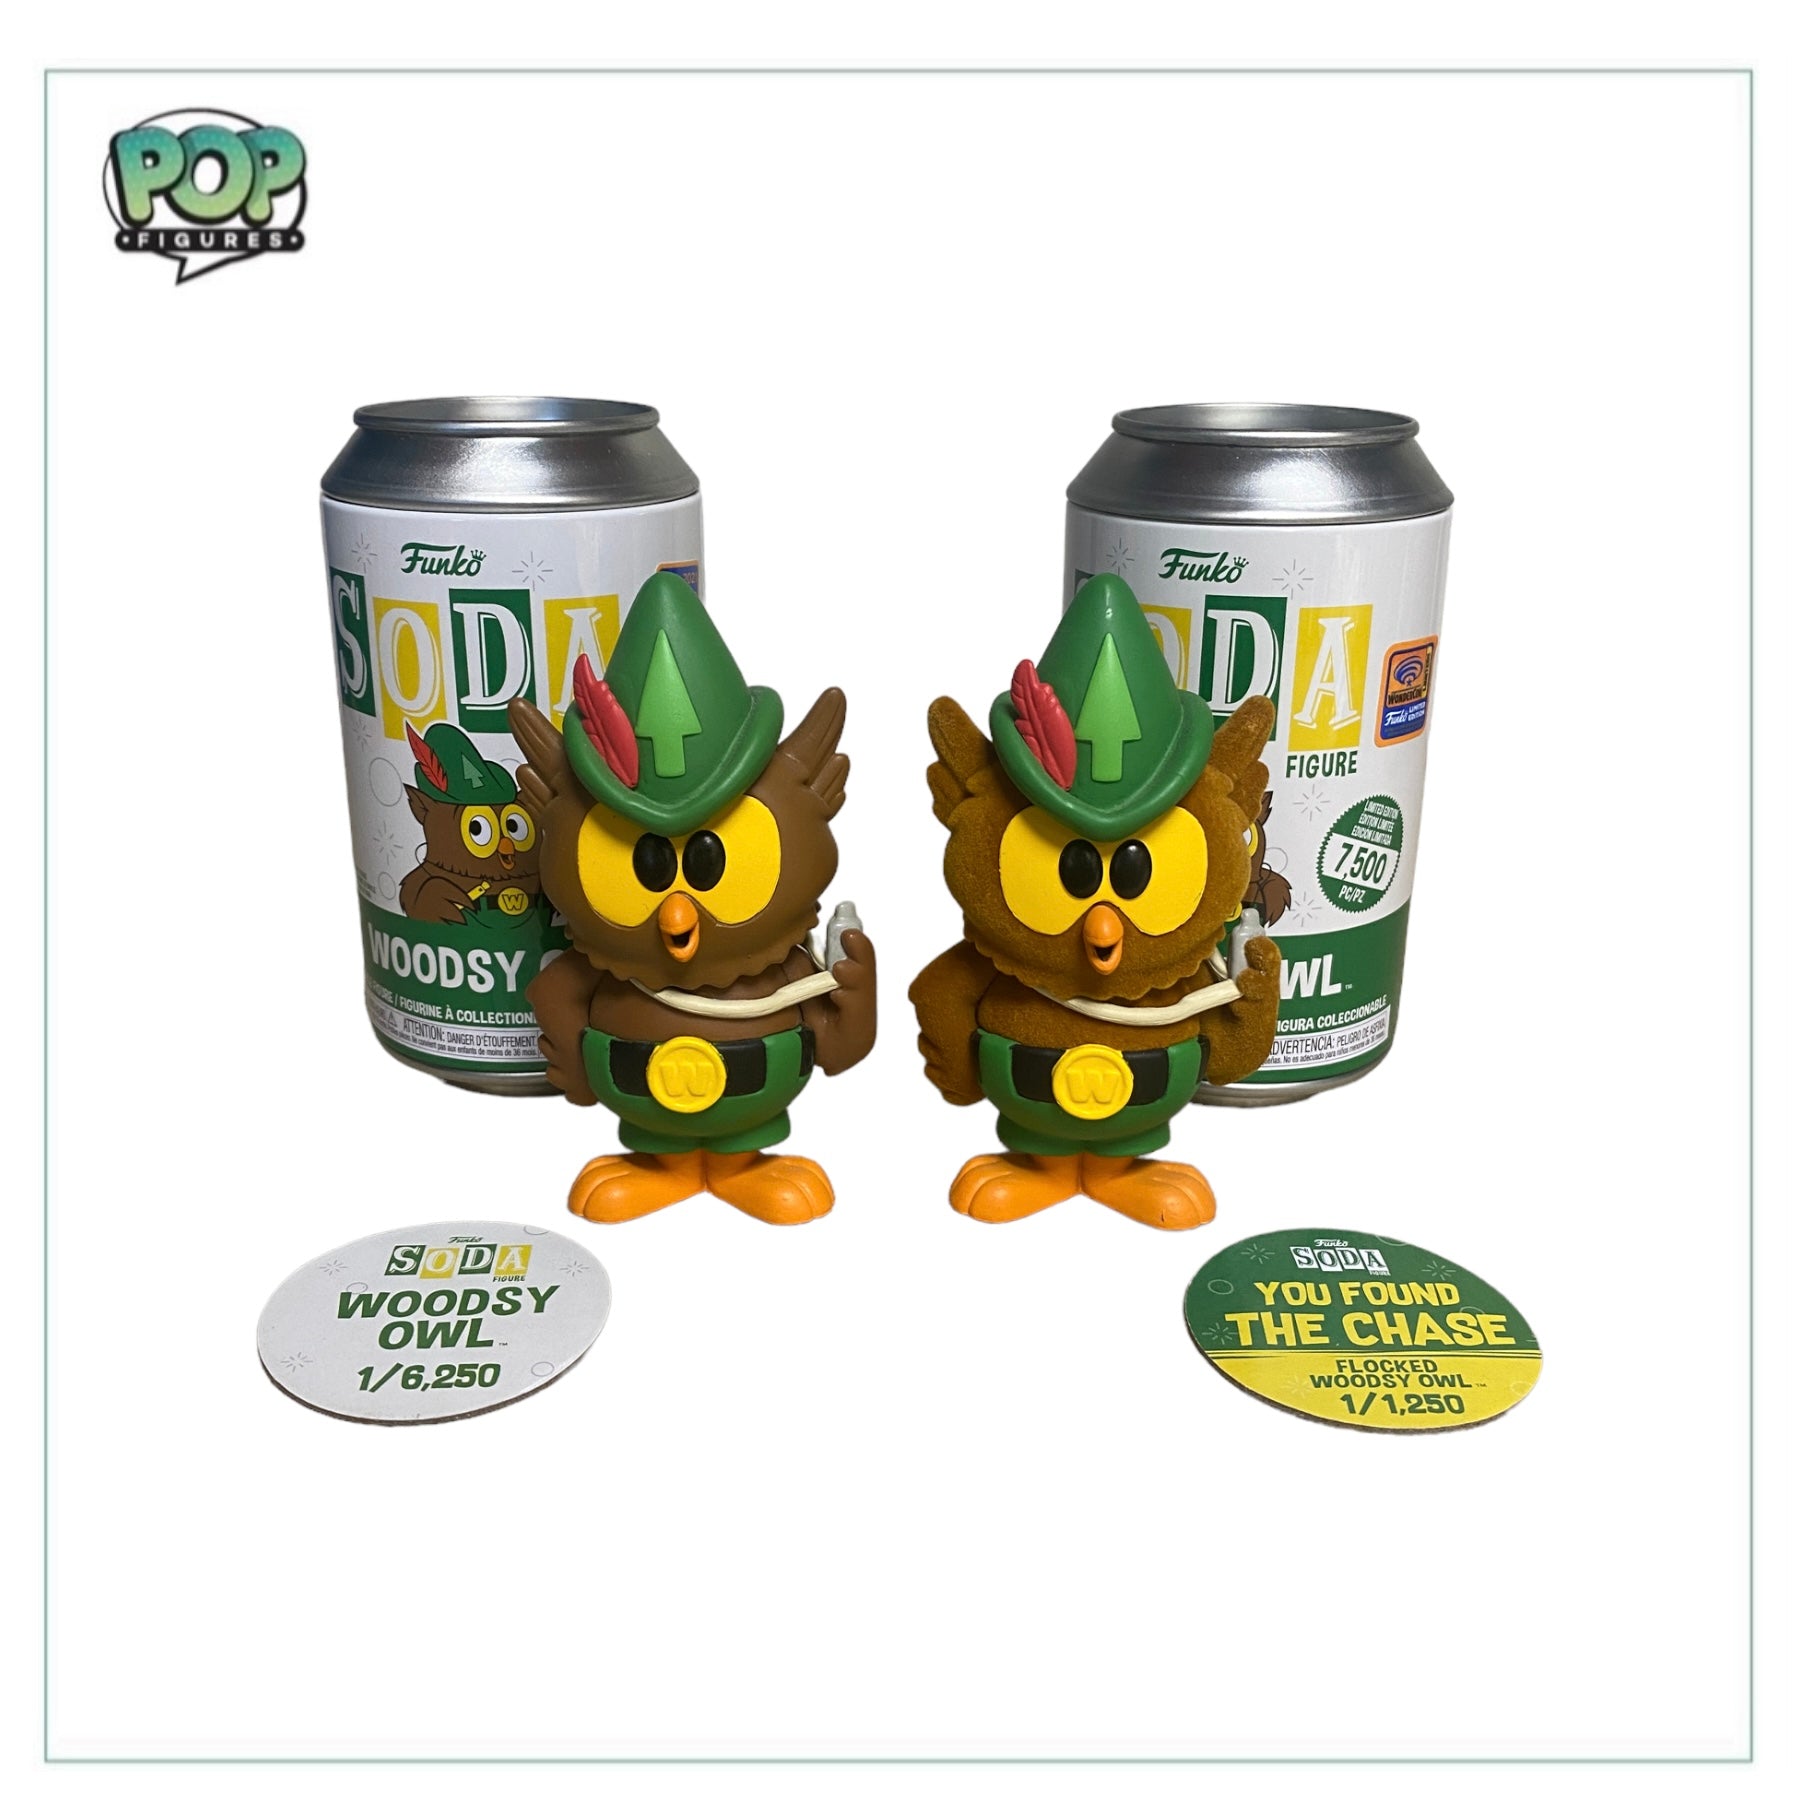 Woodsy Owl Common & Flocked Chase Funko Soda Vinyl Figure Pair! - Wonder Con 2021 Shared & Official Convention Exclusive LE1/8250 & LE1/1250